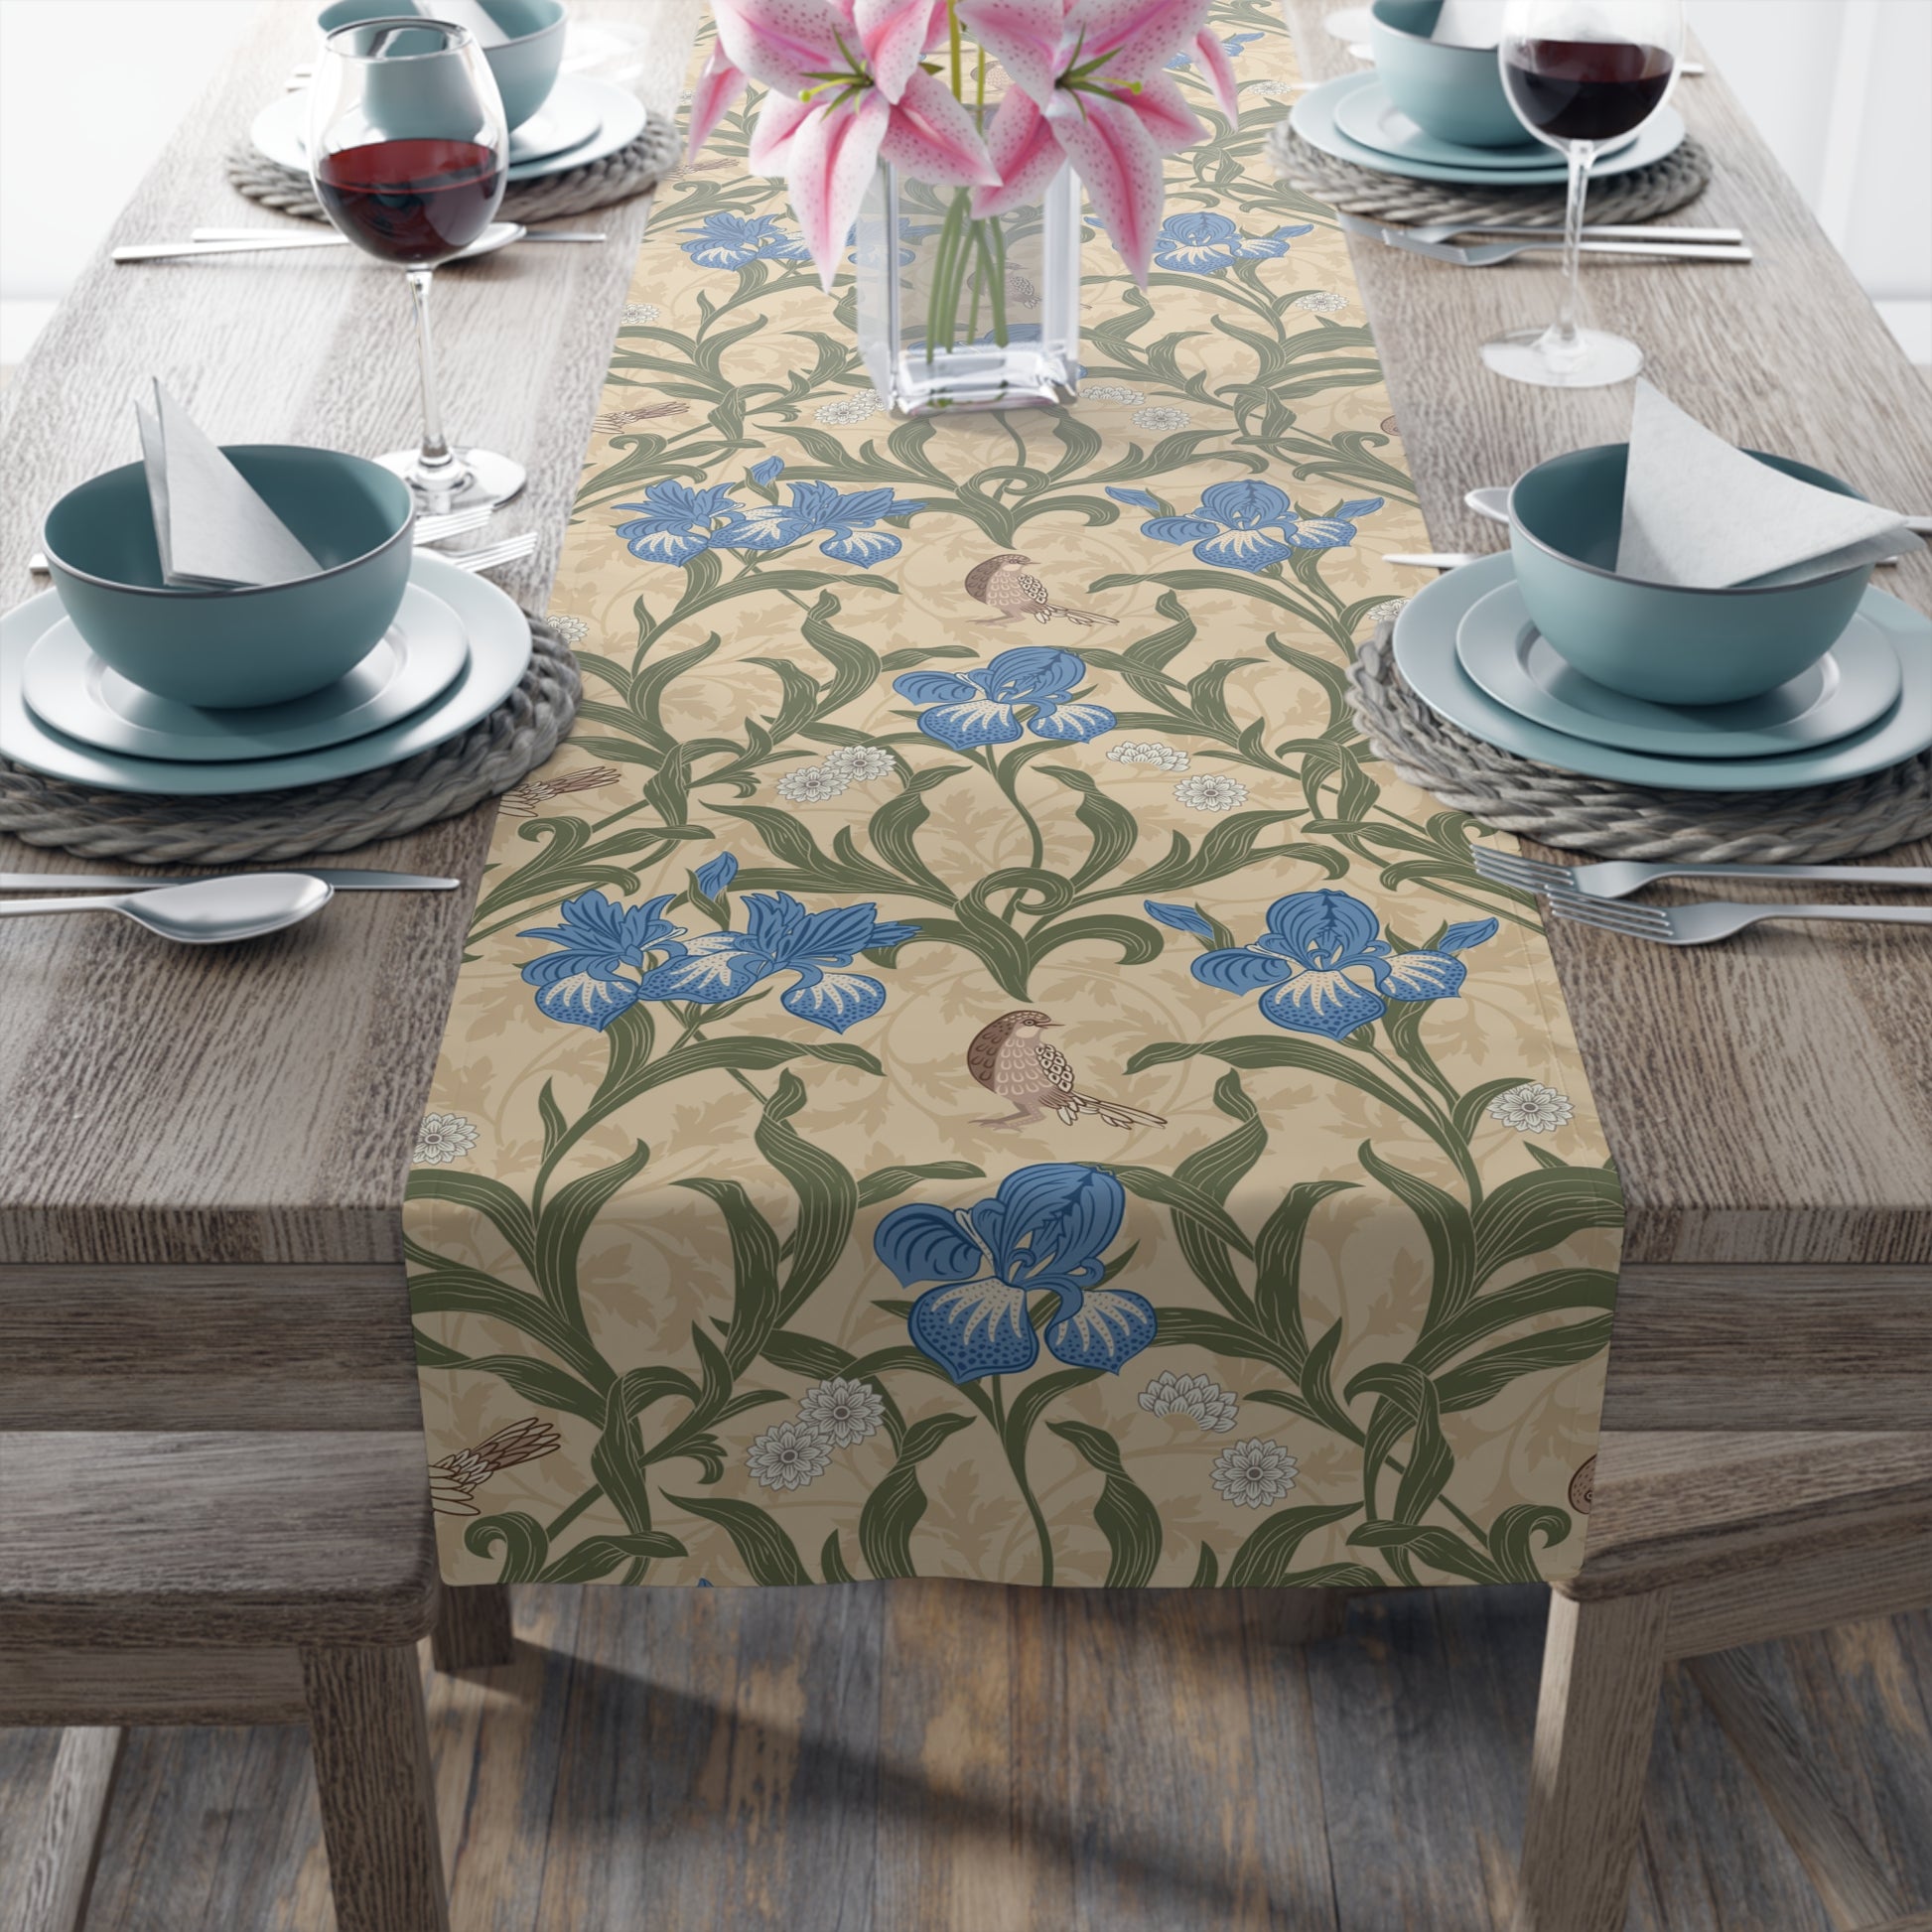 william-morris-co-table-runner-blue-iris-collection-5